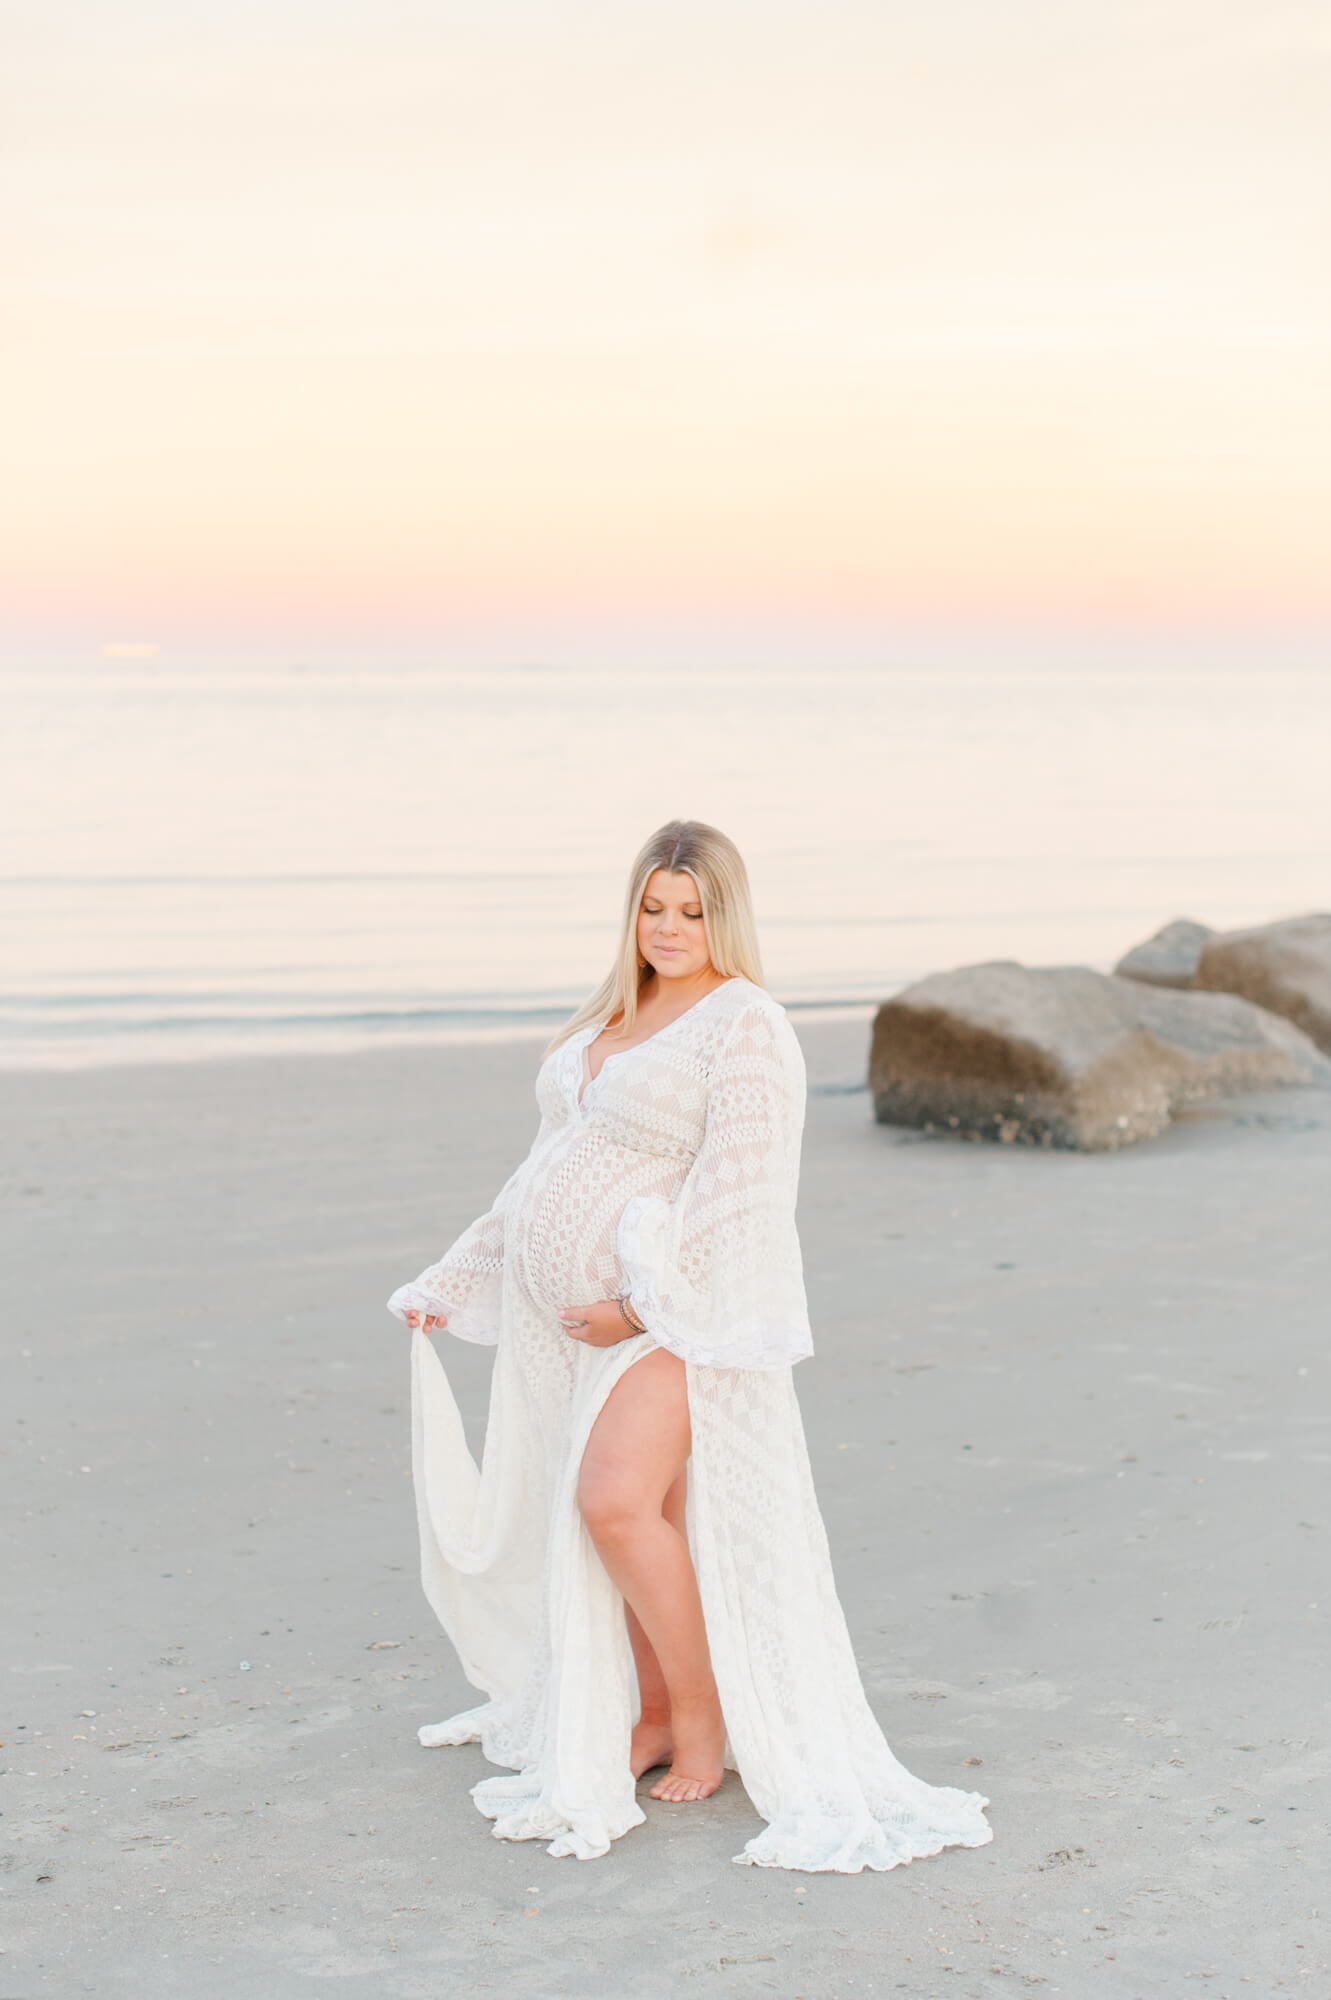 Stunning expectant mother stands holding her white lace gown and her belly during golden hour on the beach. Reflections OBGYN